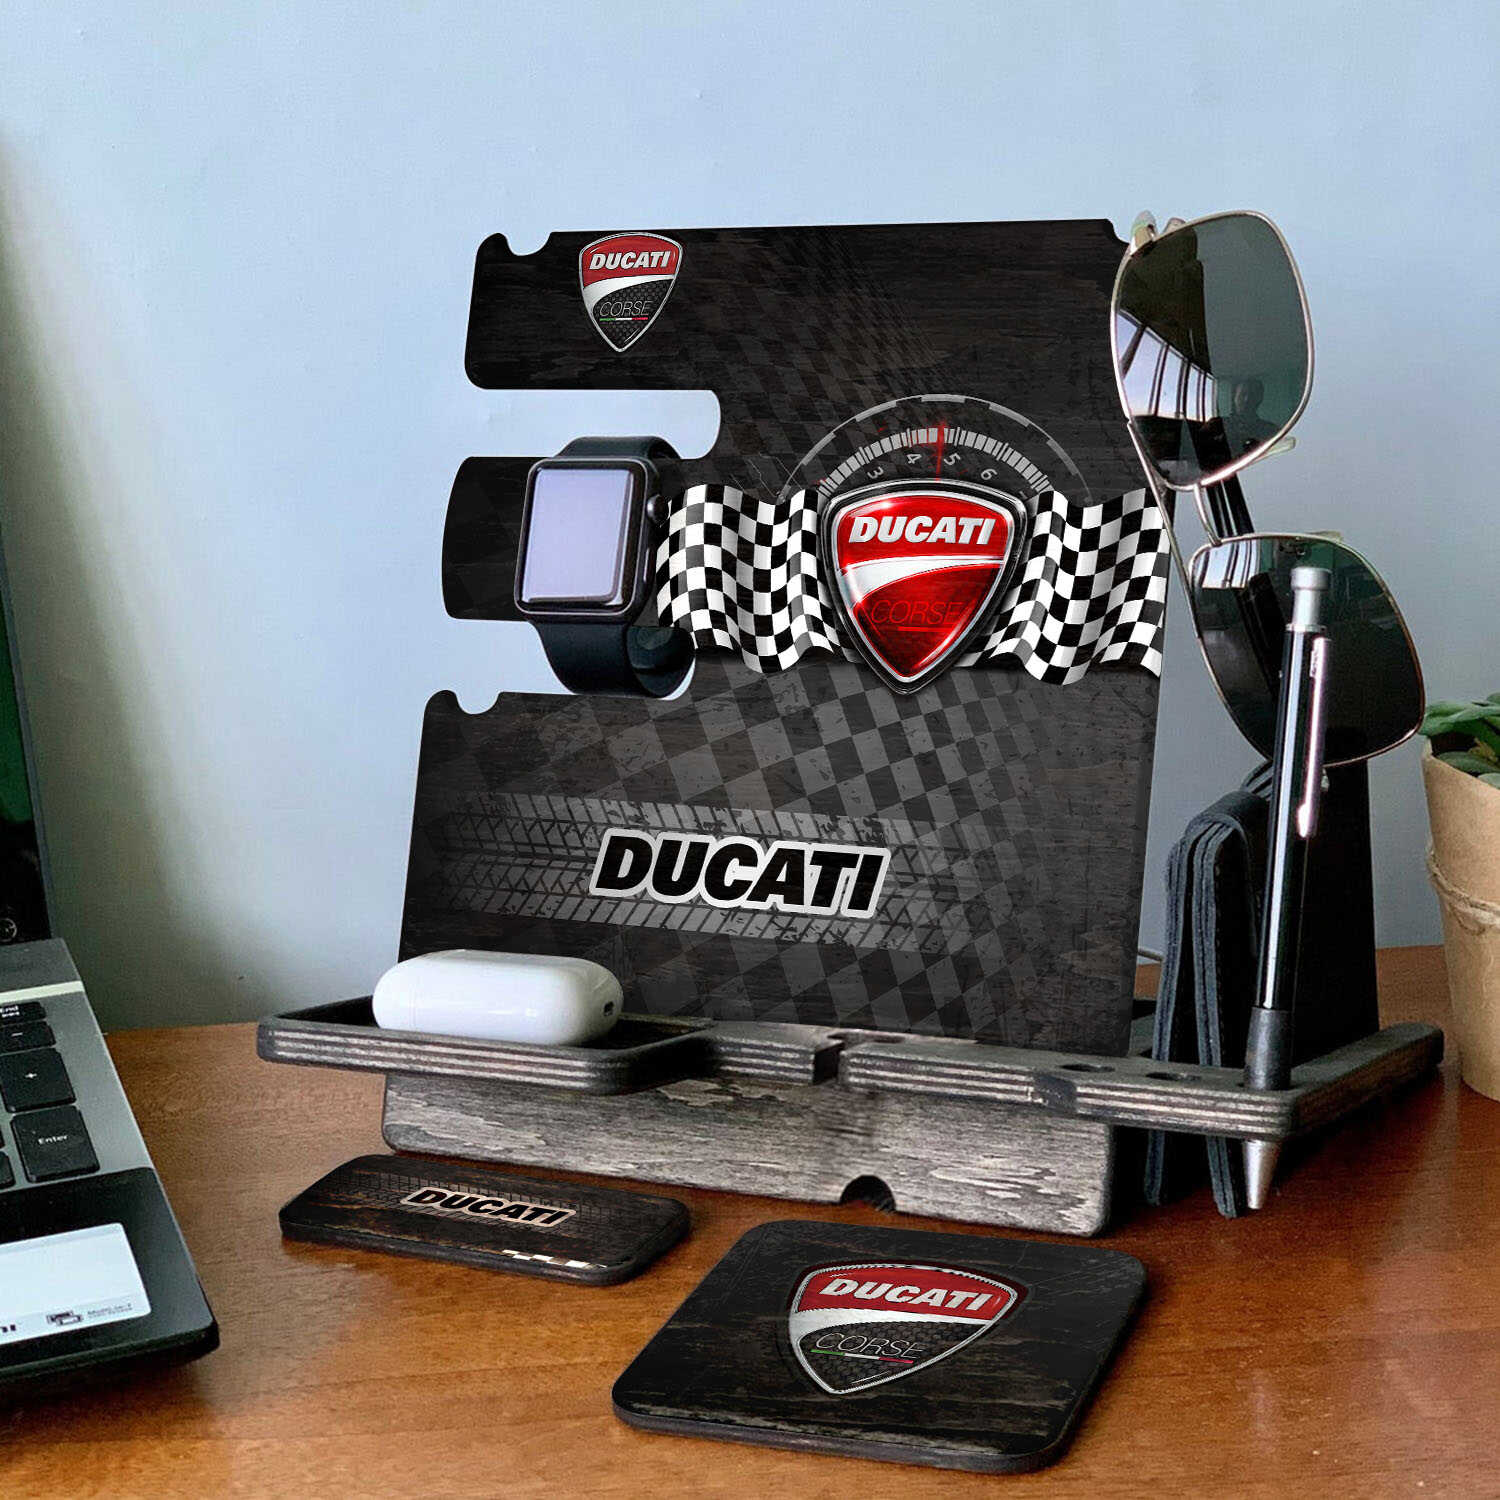 Ducati Phone Docking Station - Wooden Mobile Gadget Organizer For Ducati Fans